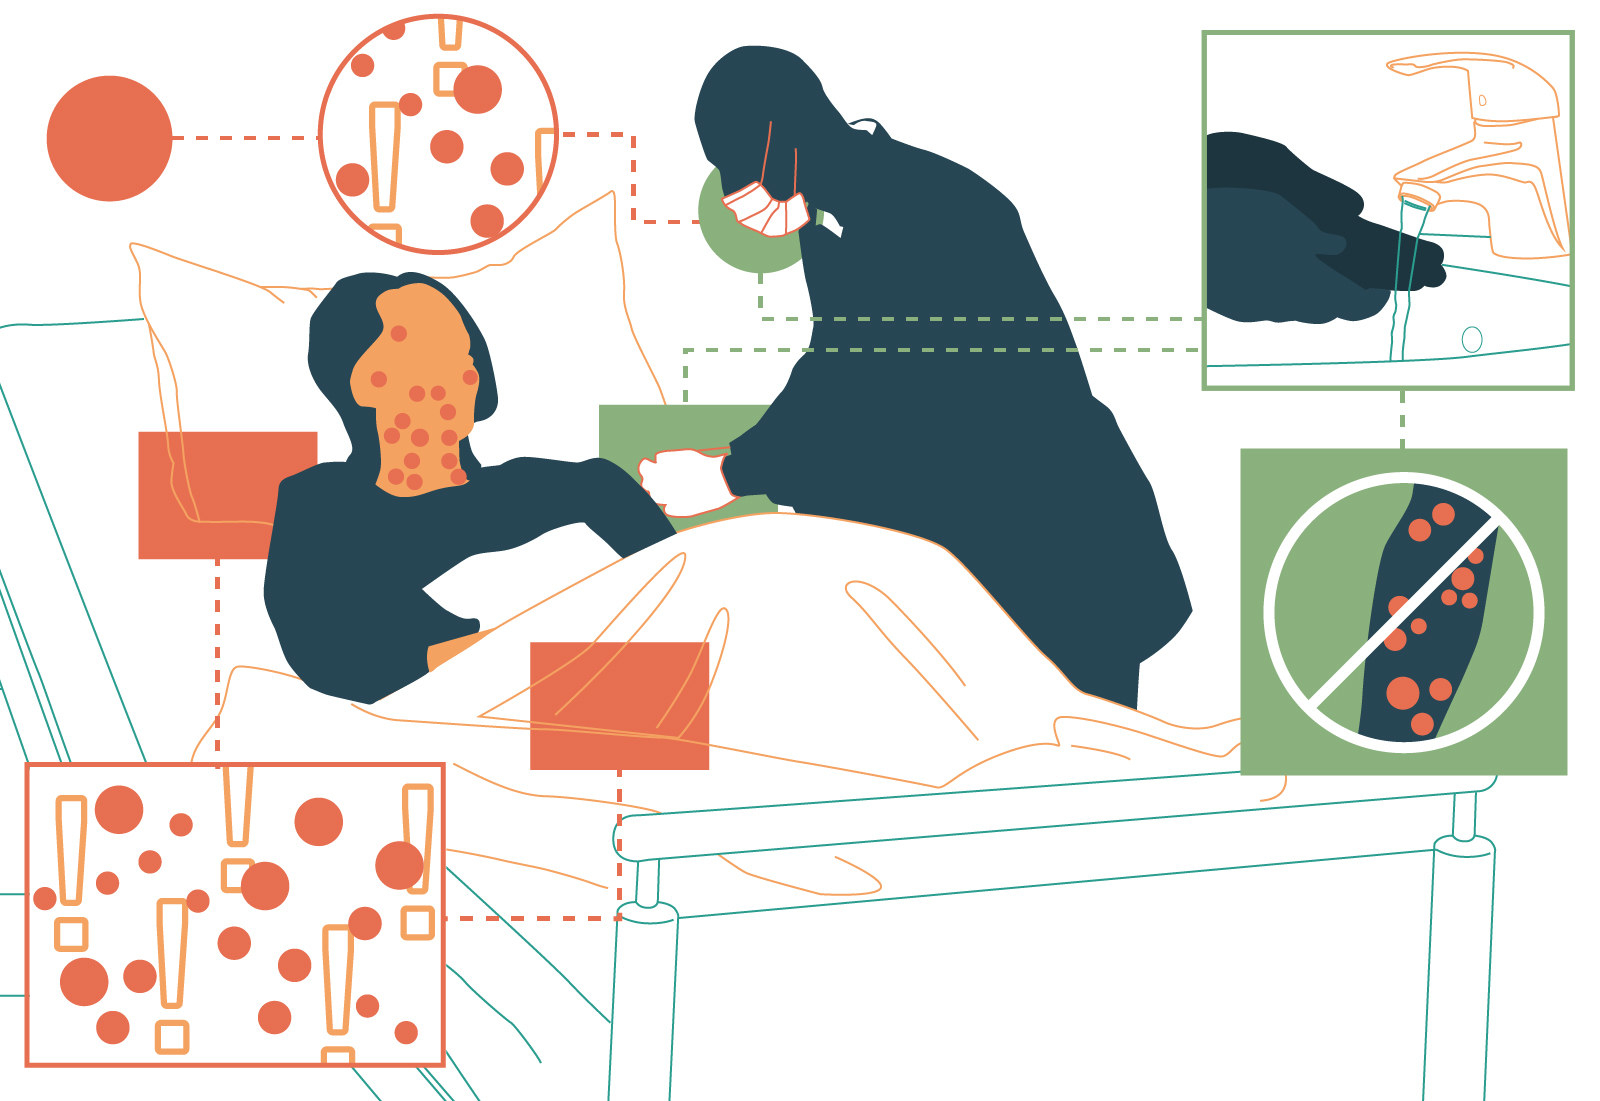 An infected person in the bed with bedding and air infected. A doctor caring for the patient wearing a mask and gloves. A line leads from the PPE to the doctor washing hands in the sink. This box leads to a graphic showing a low chance of transmission.